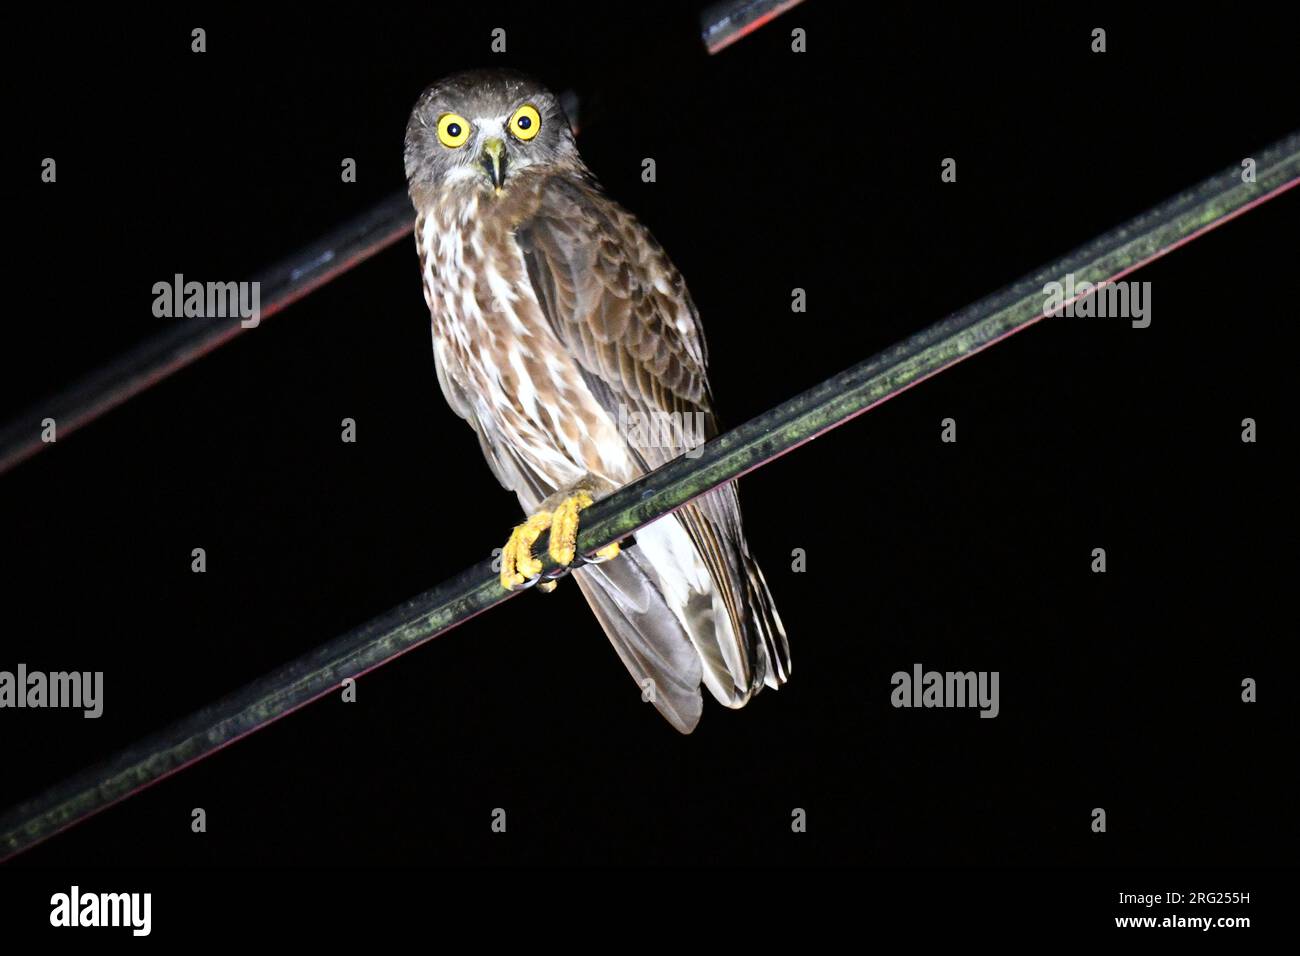 Chocolate Boobook (Ninox randi) at Subic Bay, Luzon, in the Philippines. Perched on an electricity wire during the night. Stock Photo